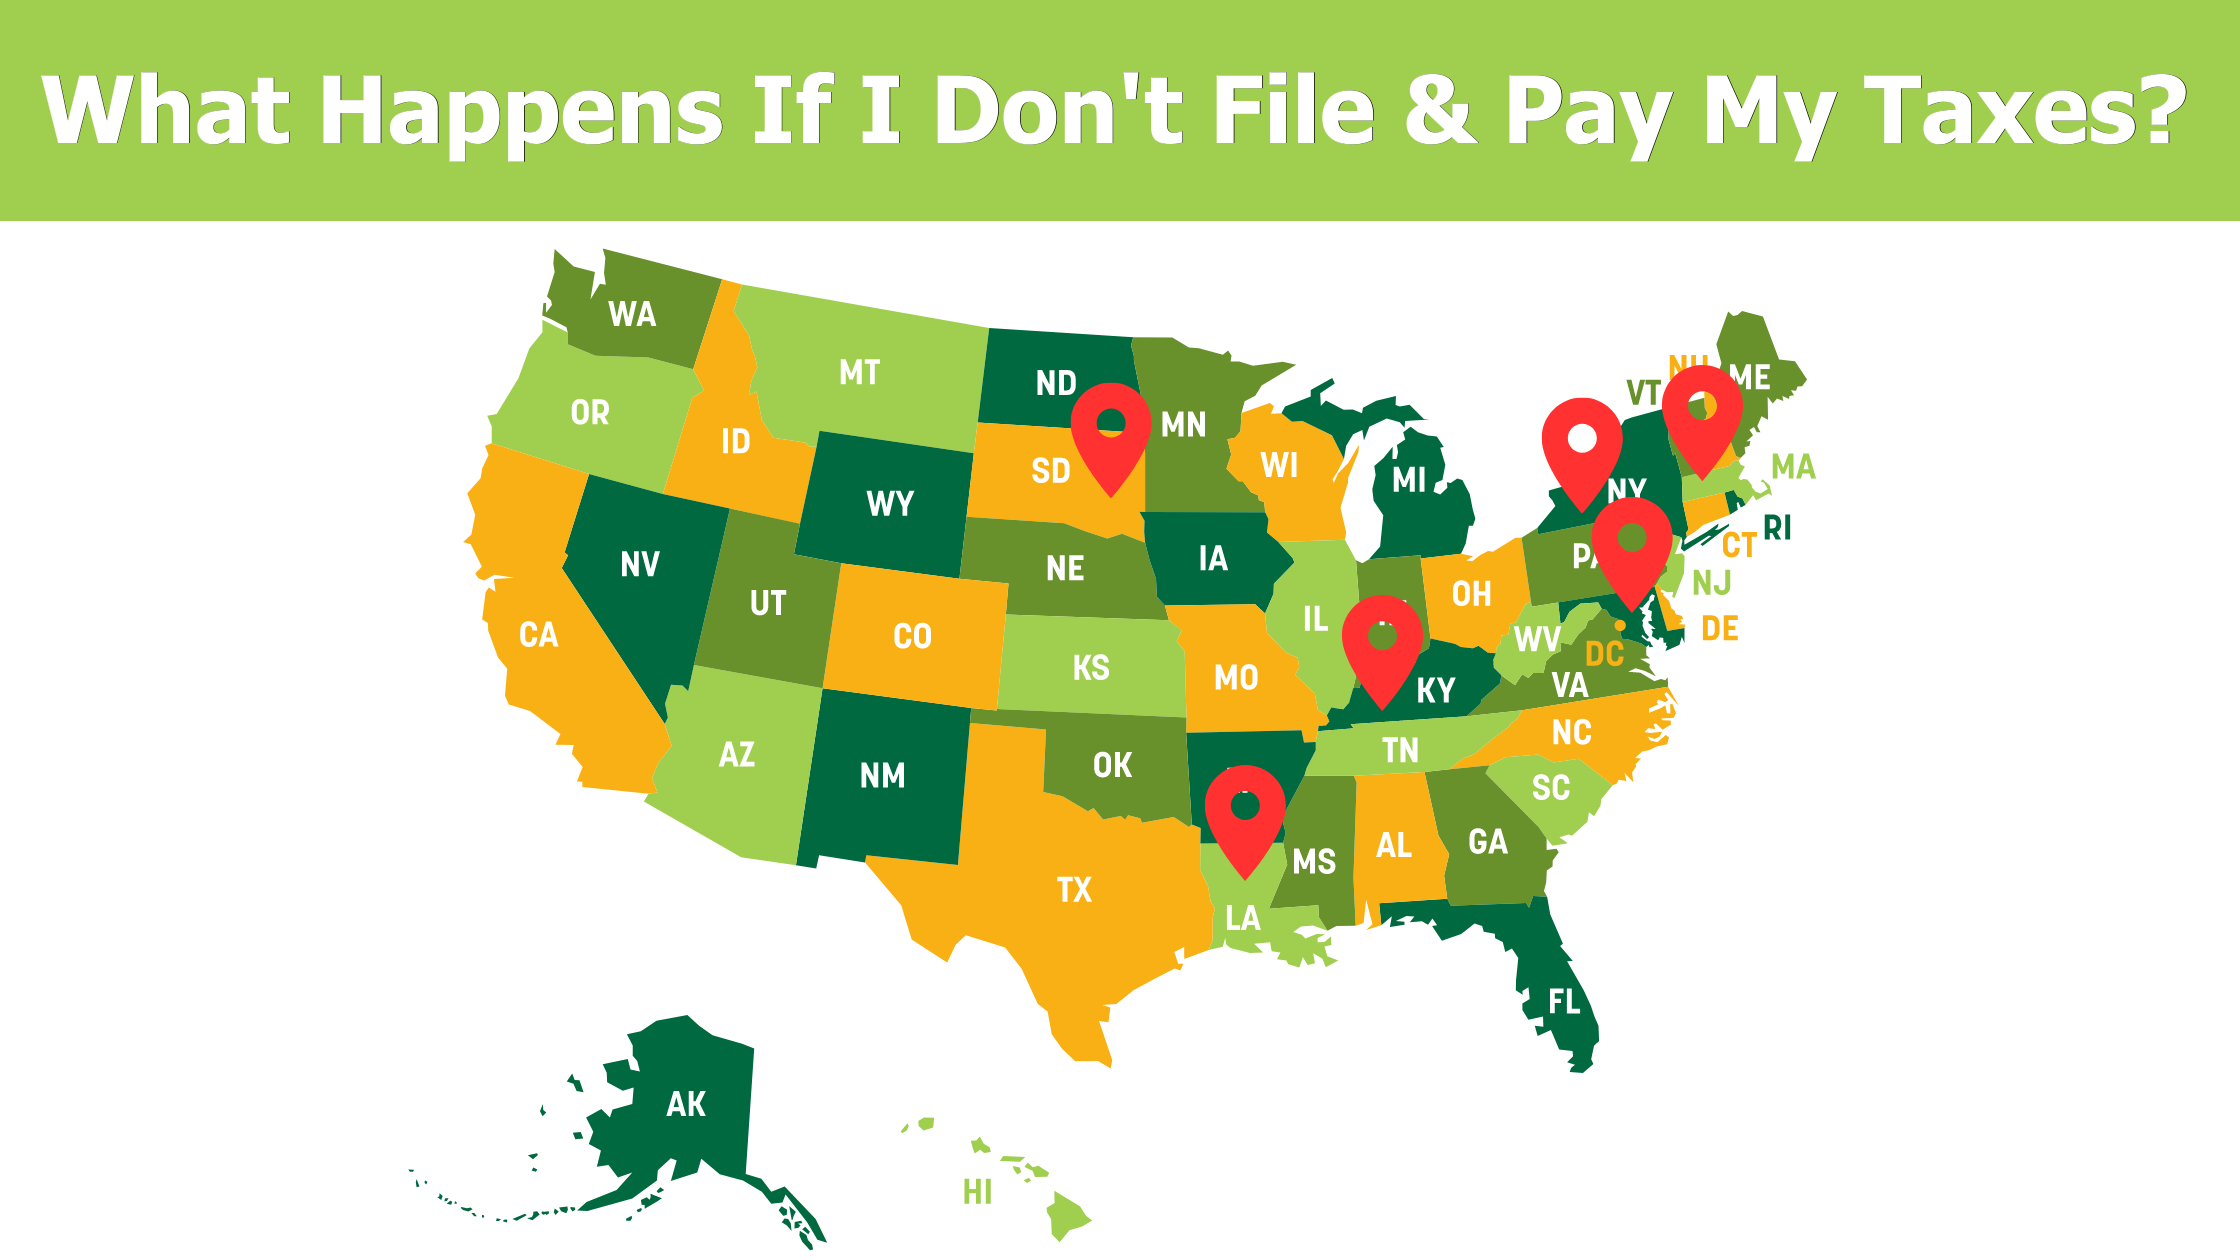 Six states have strict rules on if you don't file and pay your taxes.